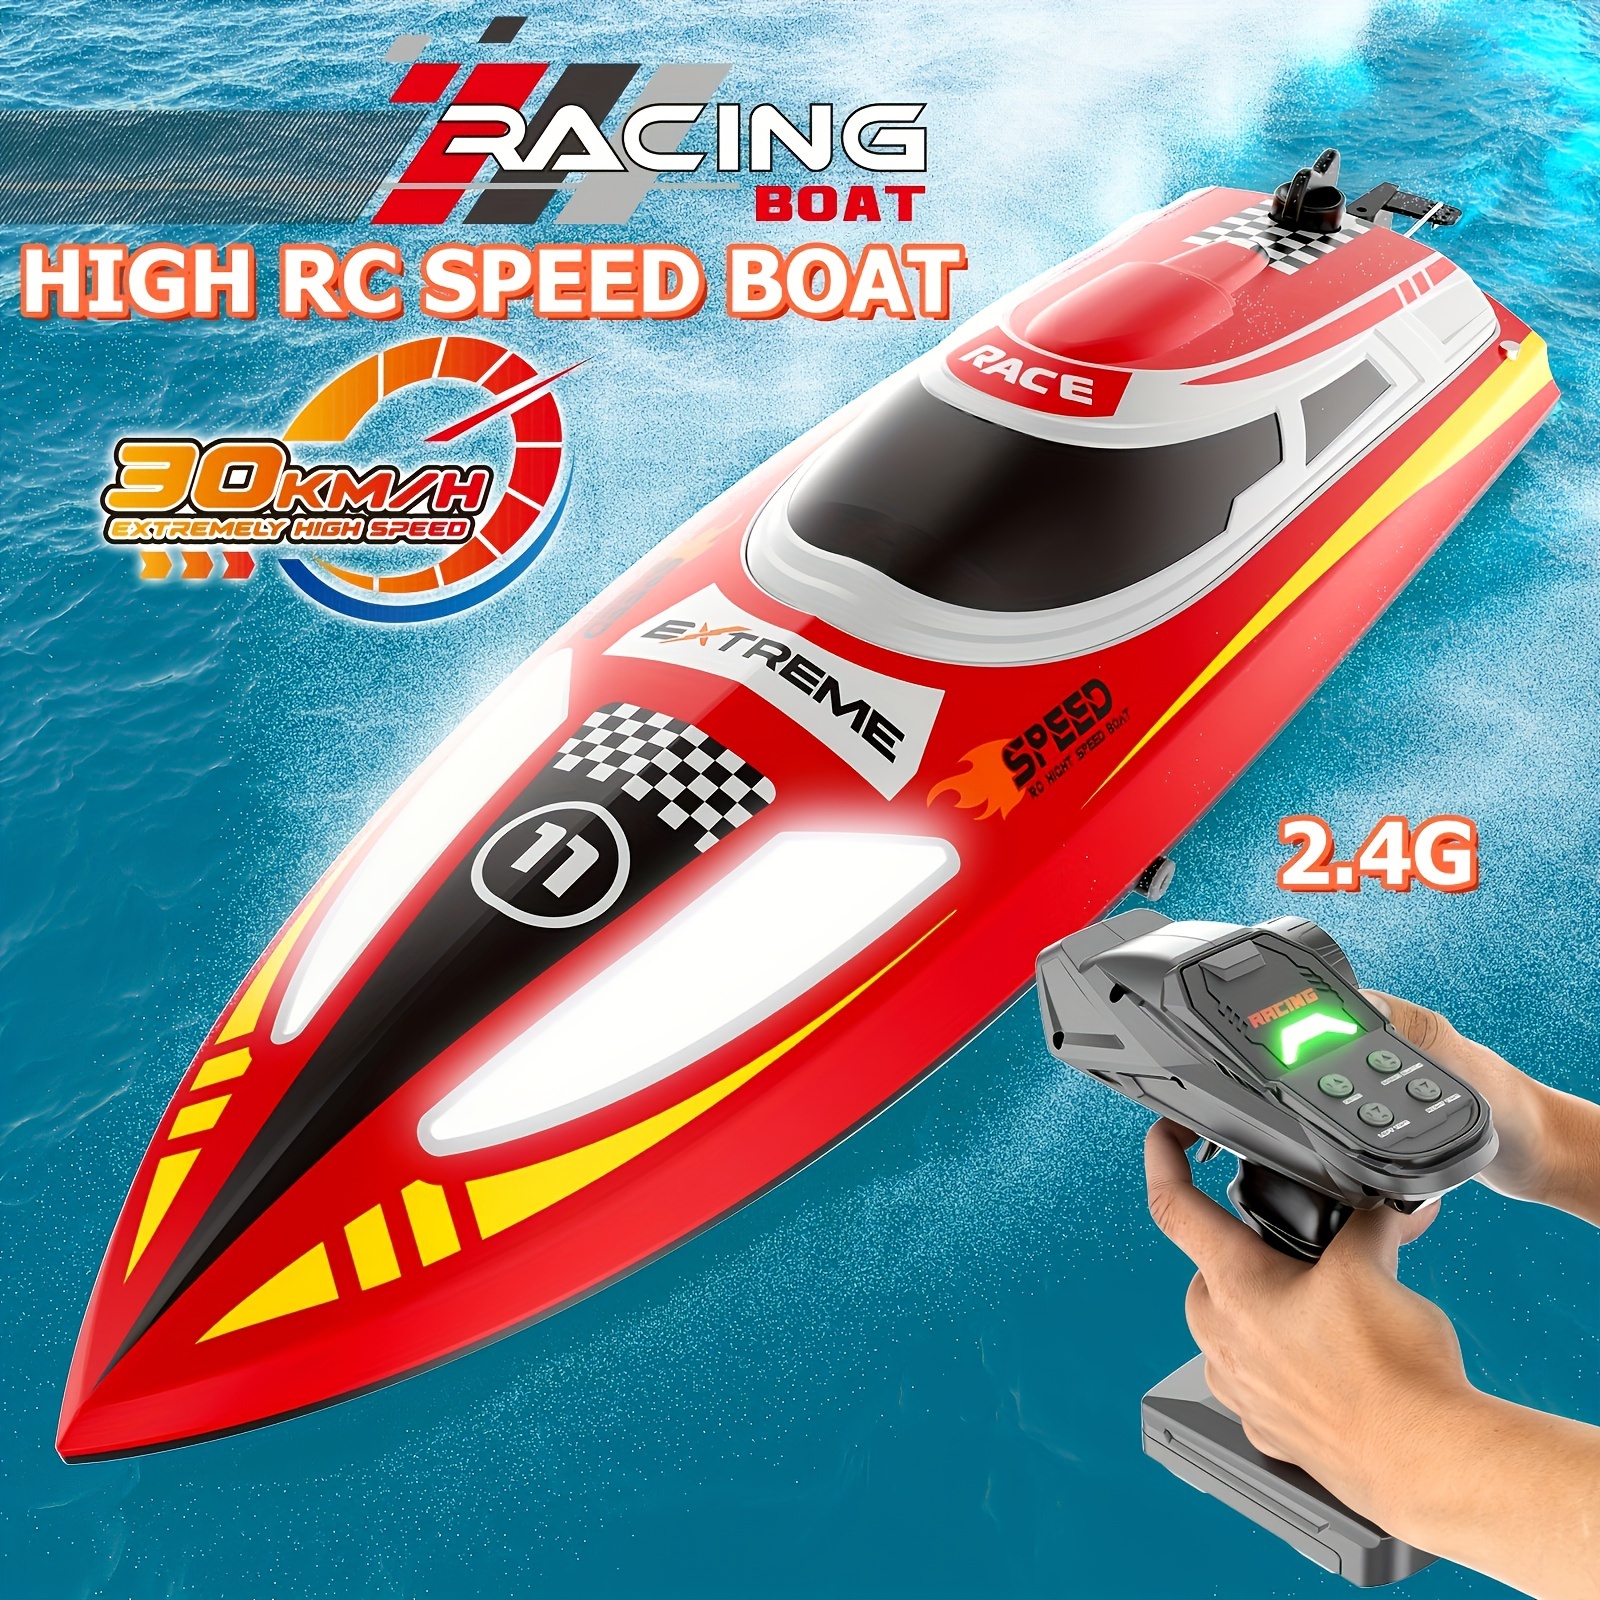 

Lake River And Pool Remote Control Boat With Cruise Control, Self-calibration, Led Lights, One-click Presentation, Fast Sailing 30kph, 2 Batteries For 60 Minutes